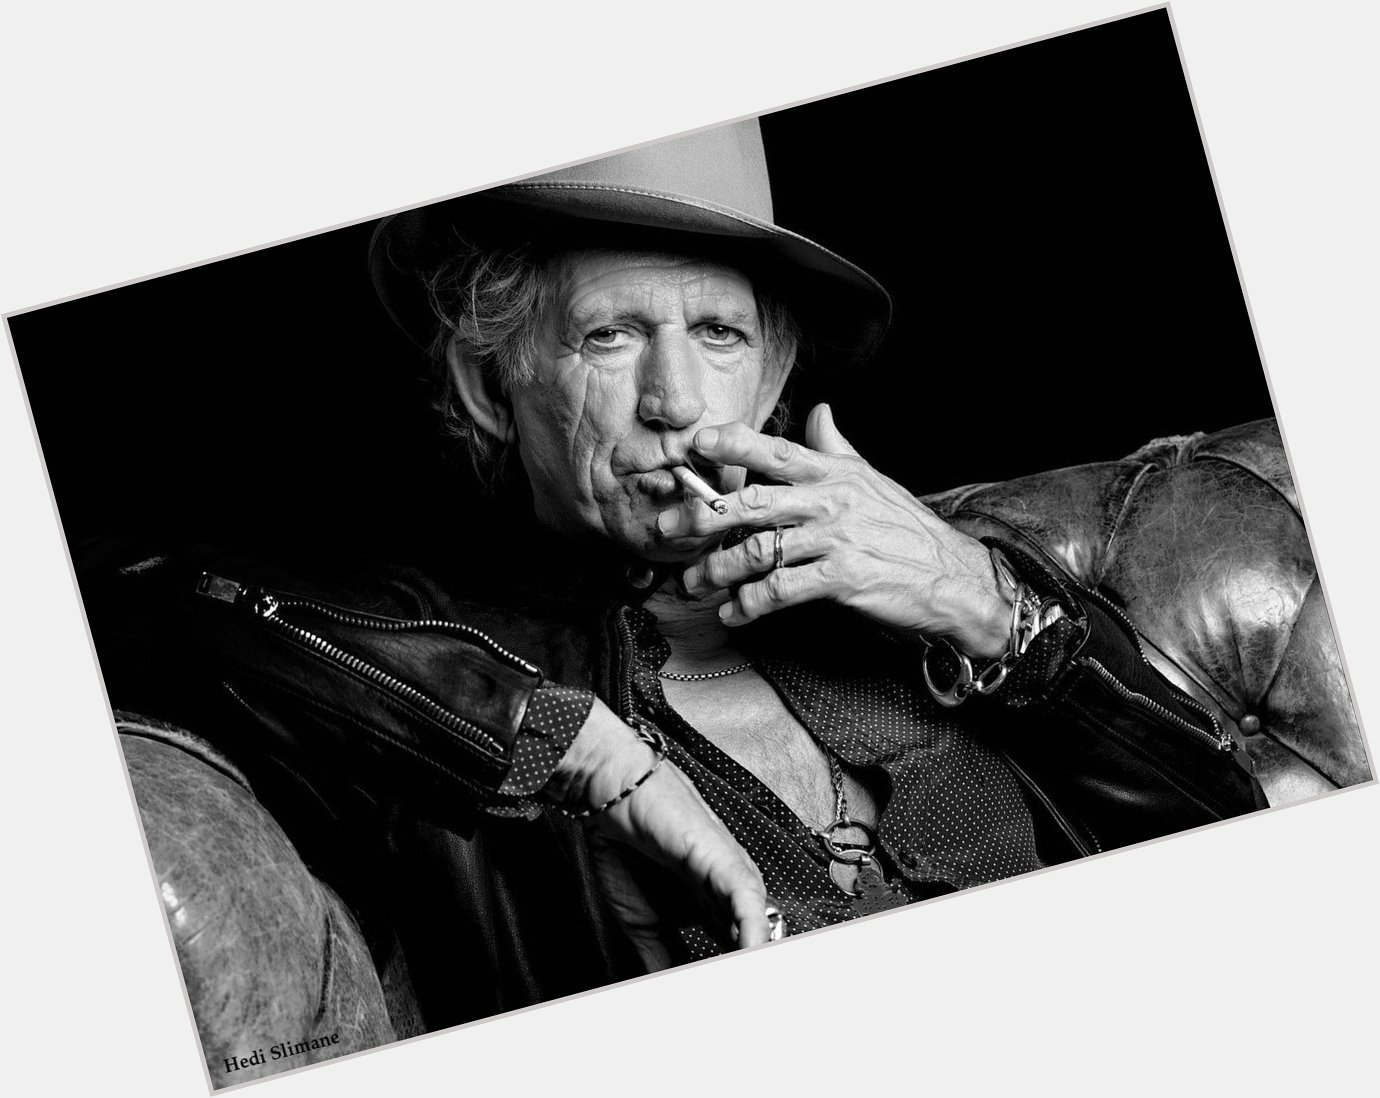 \"Some things get better with age. Like me.\"

Happy Birthday, Keith Richards 